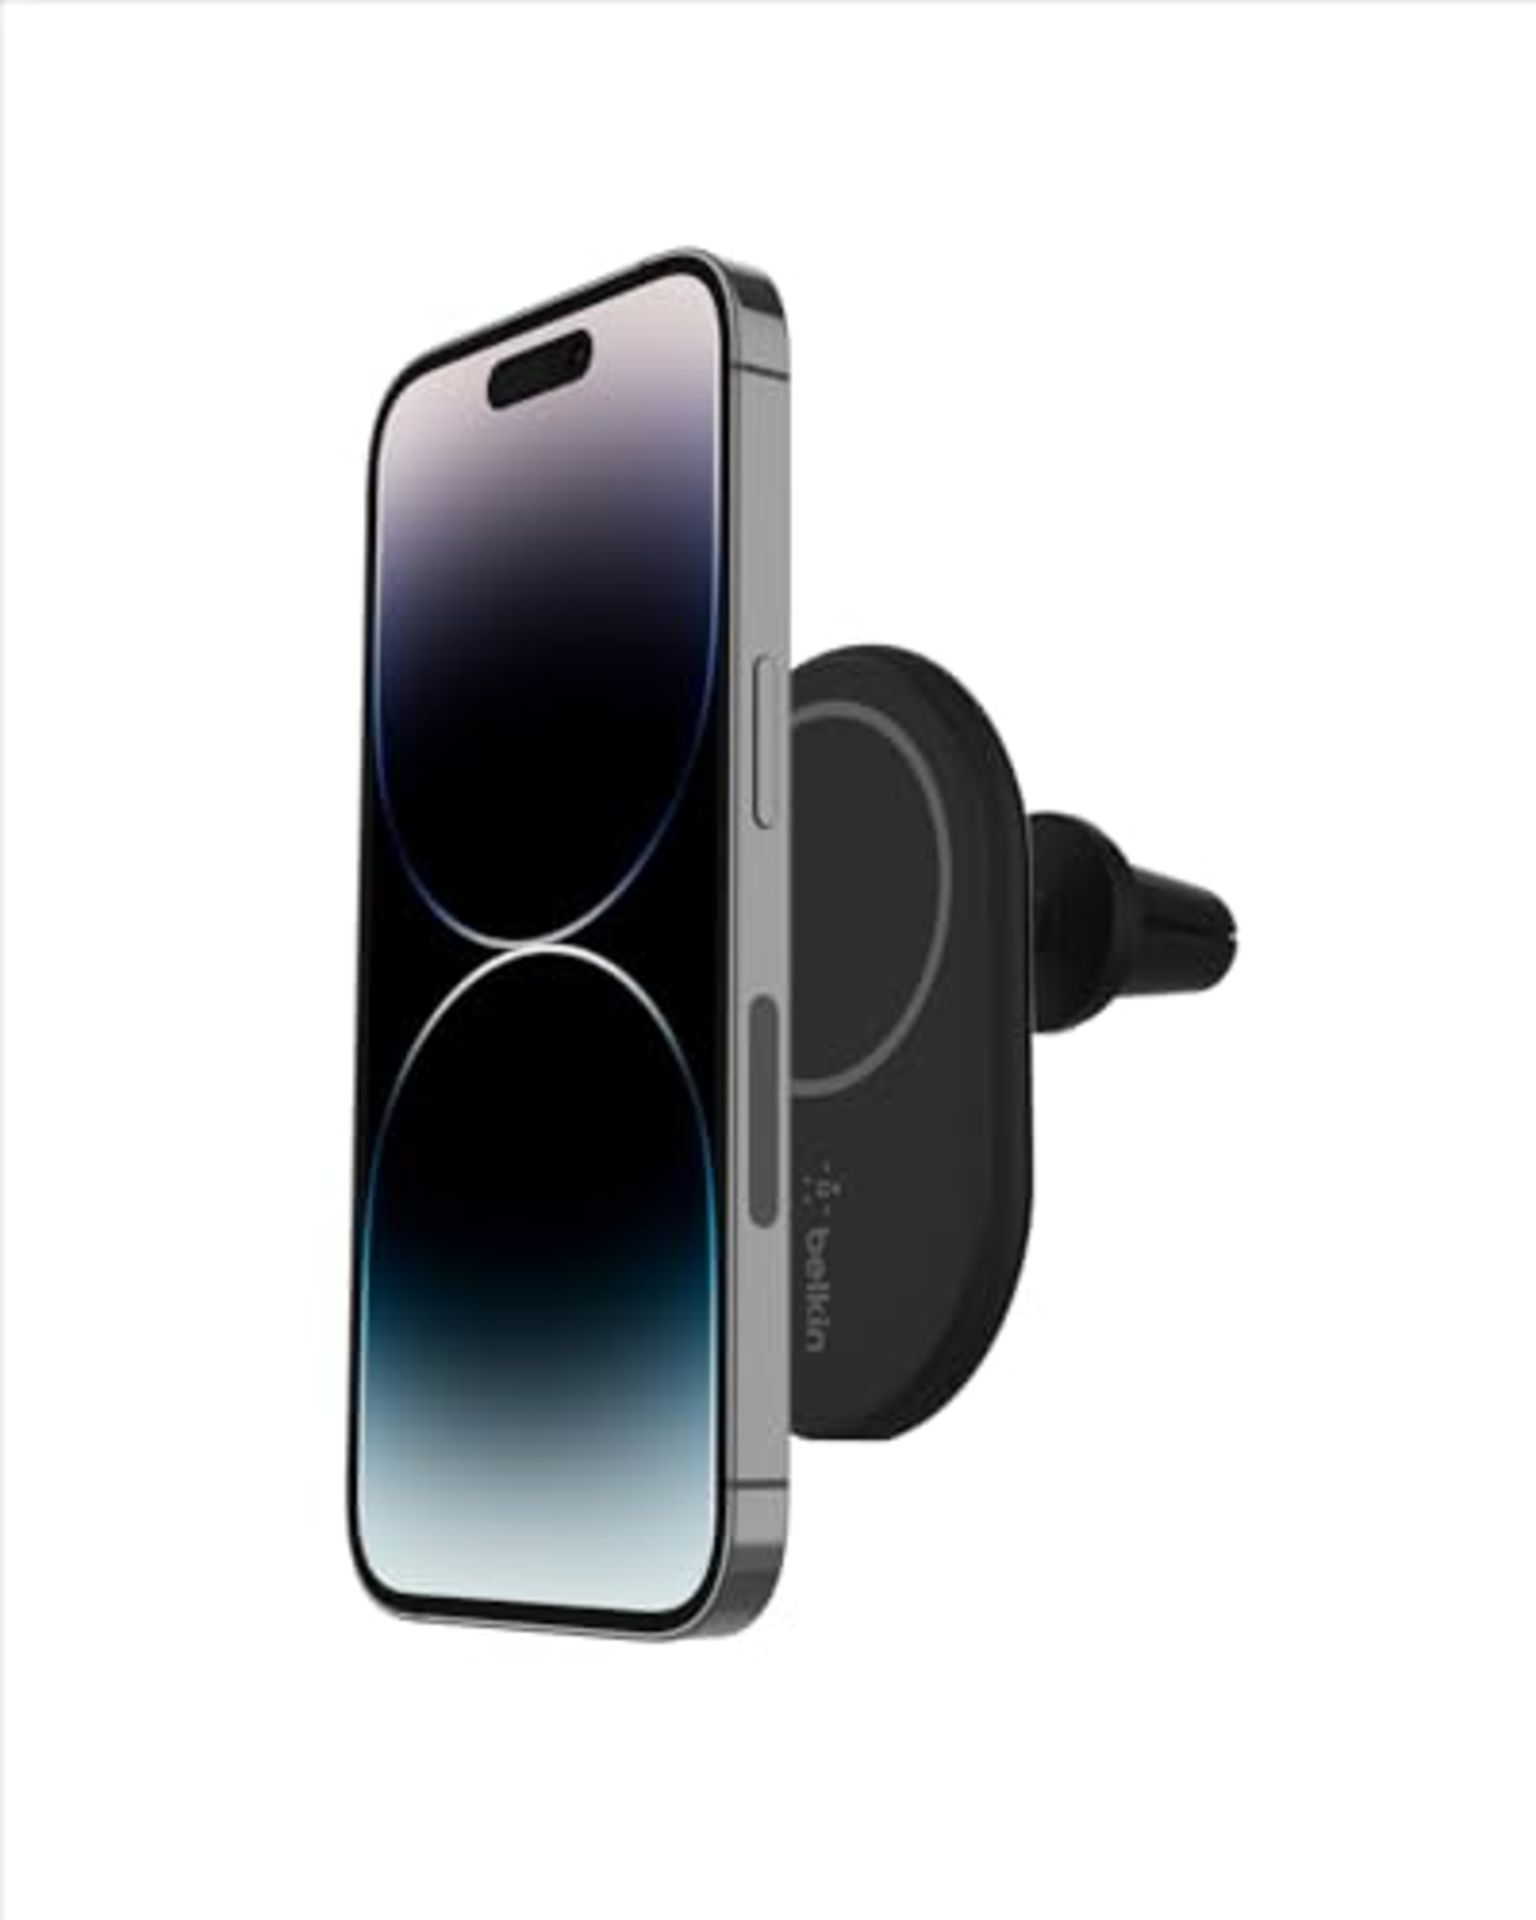 Belkin BoostCharge Wireless Charger, Magnetic Car Charger, Phone Mount Holder Compatib